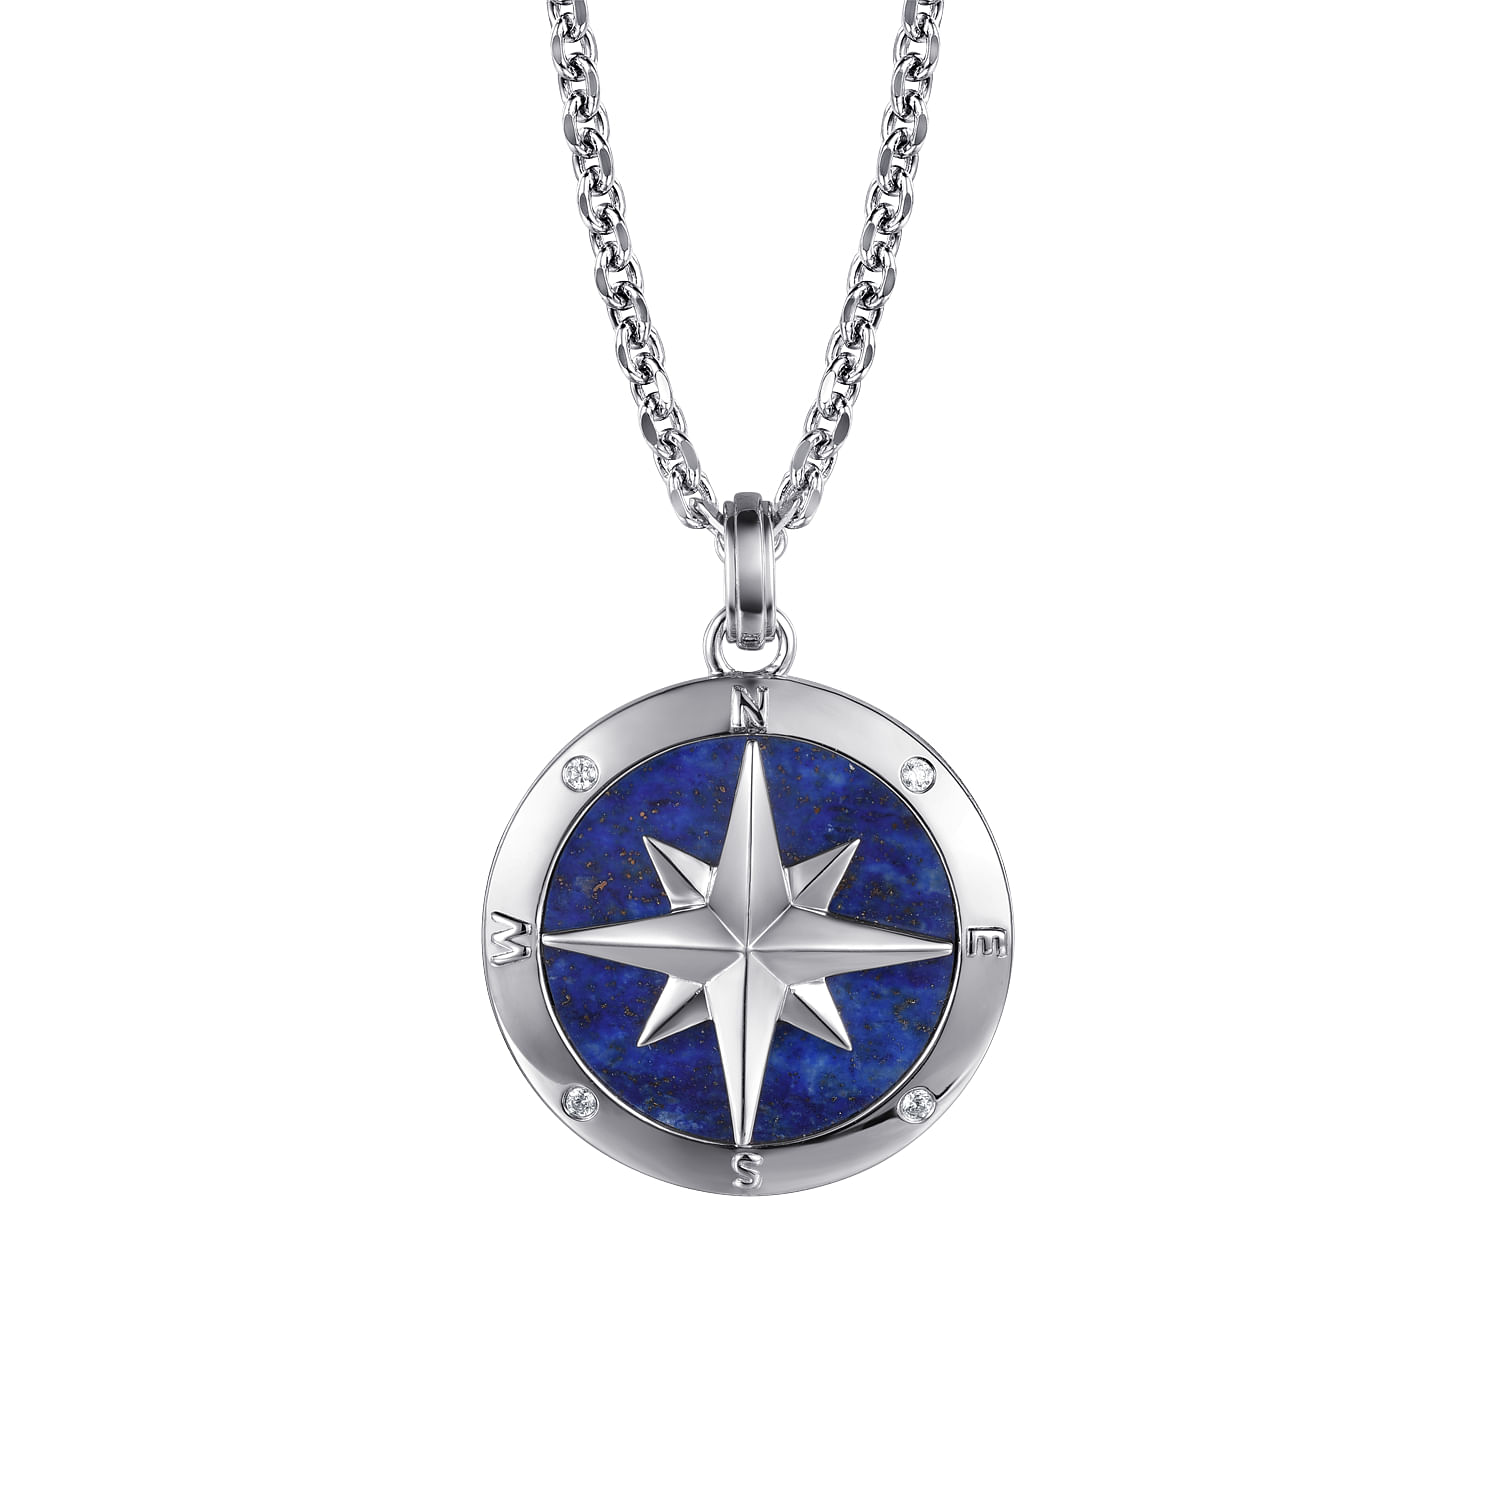 22 Inch 925 Sterling Silver Round Compass with Lapis Slab and Diamond Solid Mens Link Chain Necklace